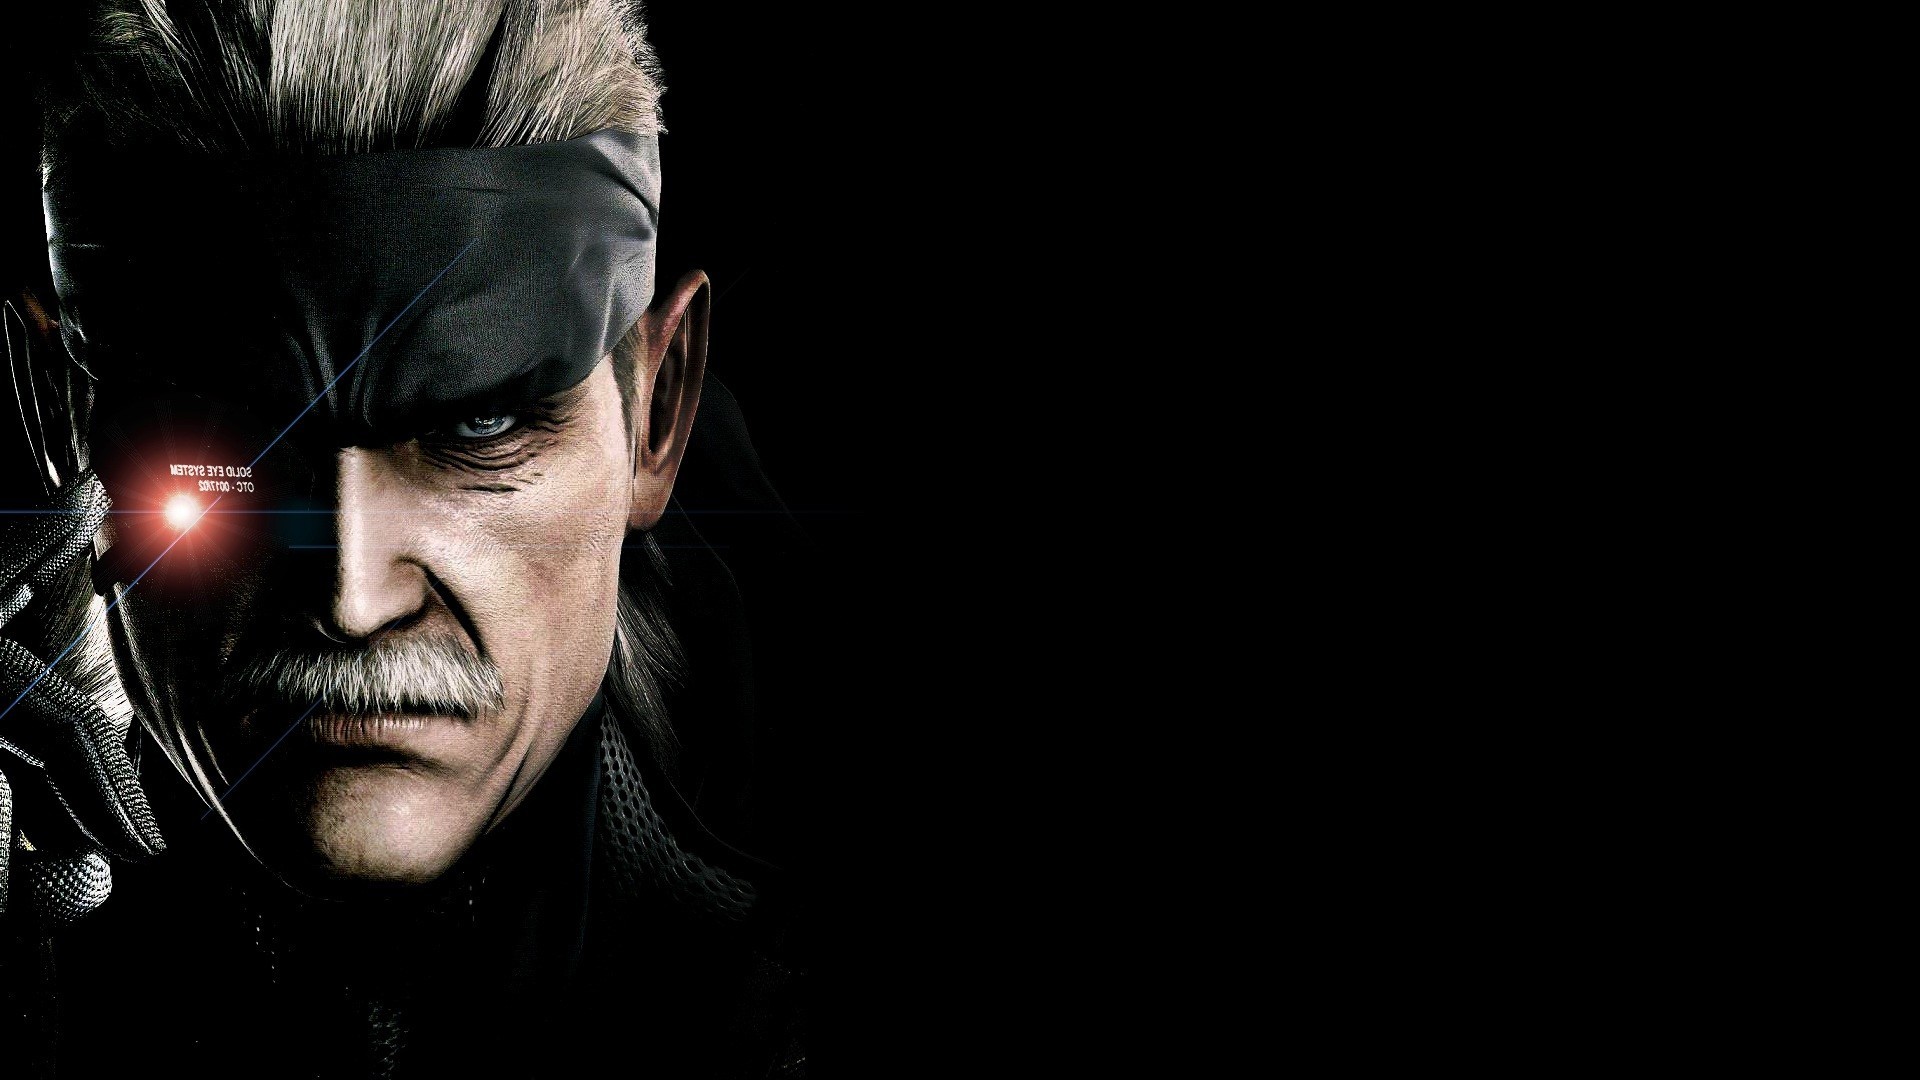 Metal gear solid v phantom pain wallpaper Picture Daily Update